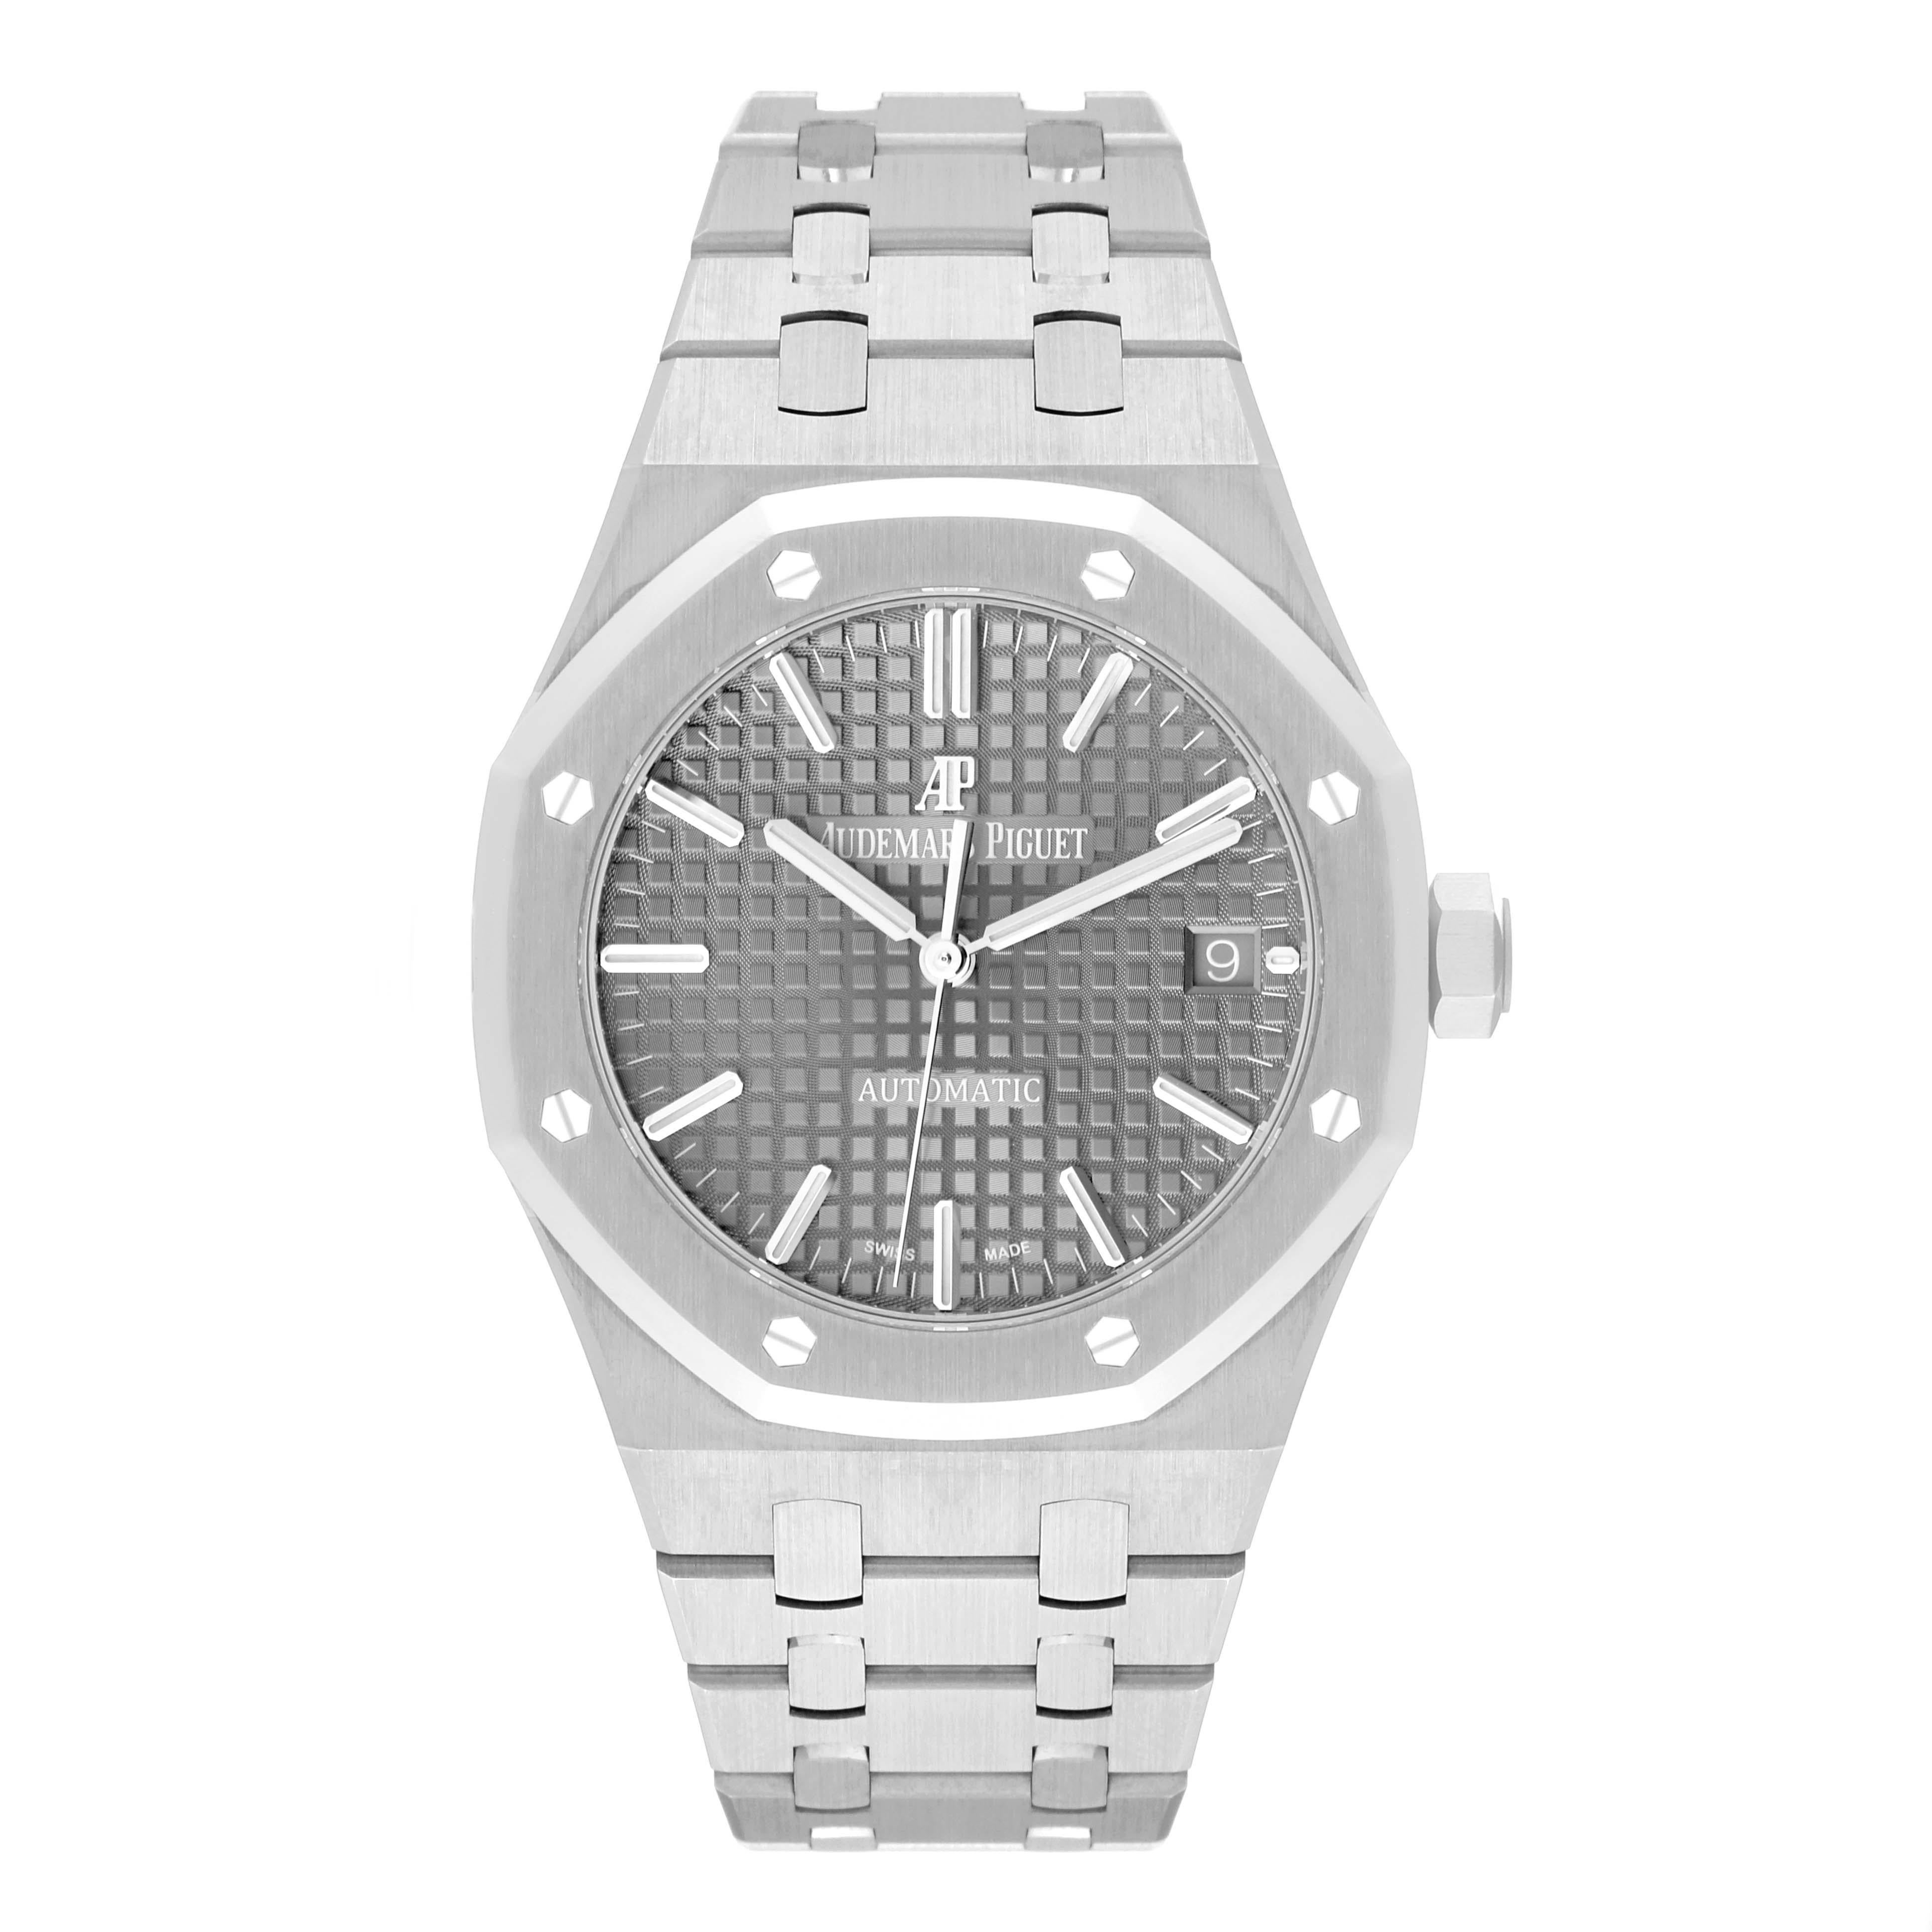 Audemars Piguet Royal Oak 37mm Midsize Steel Mens Watch 15450ST Card. Automatic self-winding movement. Brushed with polished bevel edges stainless steel case 37.0 mm in diameter. Case thickness 9.80mm. Exhibition transparent sapphire crystal